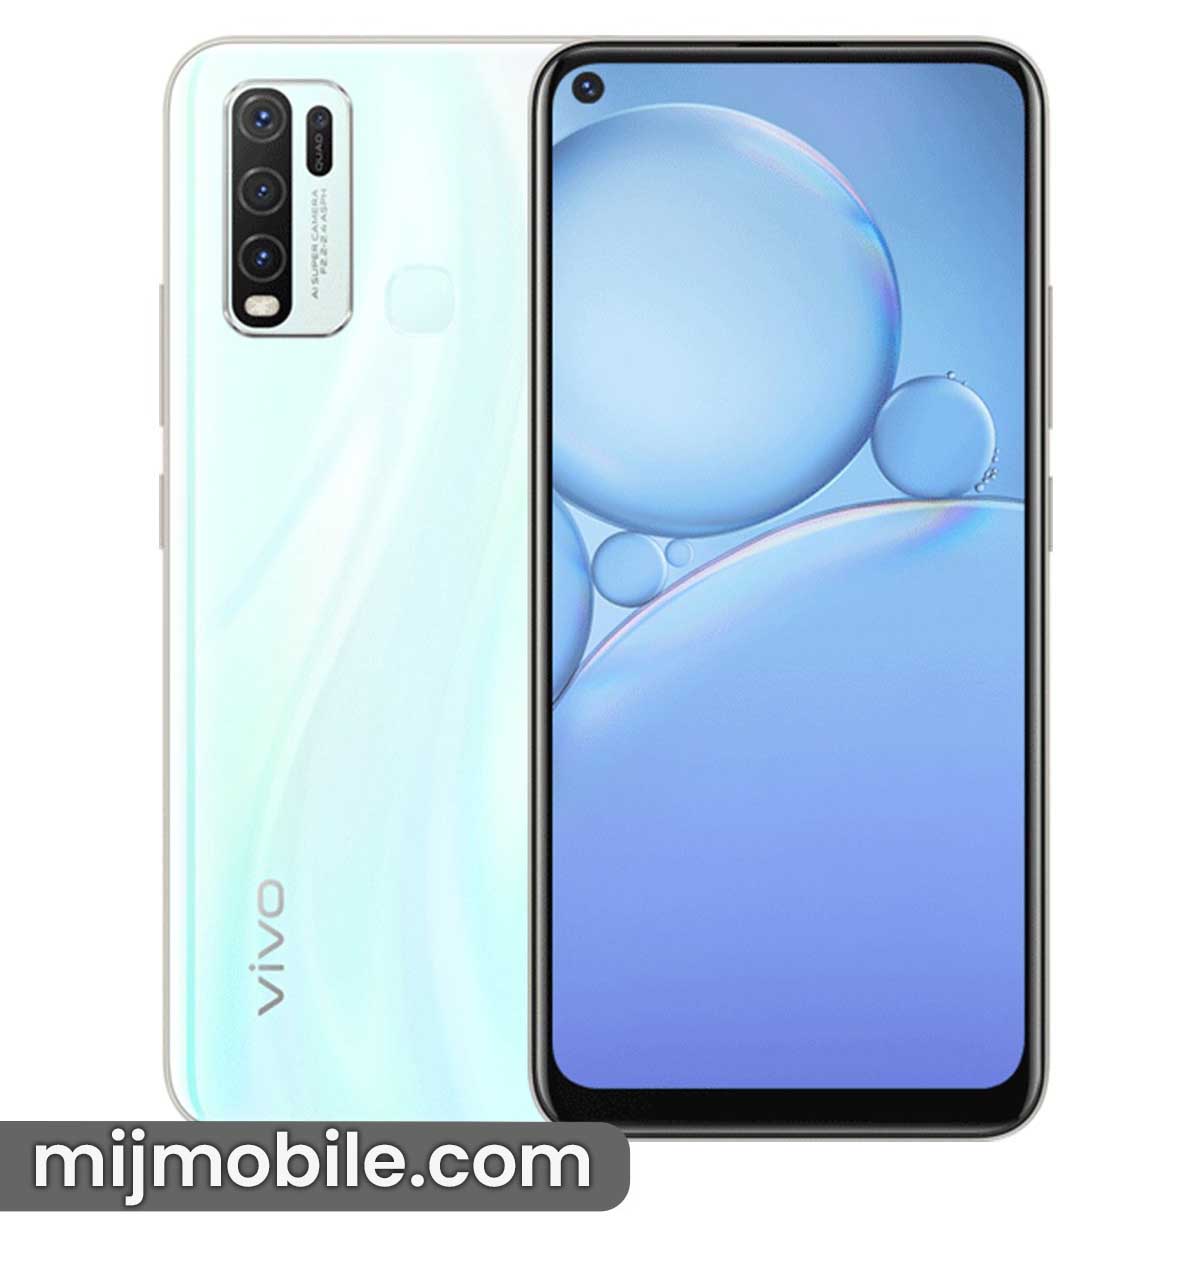 Vivo Y30 Price in Pakistan & Specifications The price of Vivo Y30 Price in Pakistanis only 27,999.